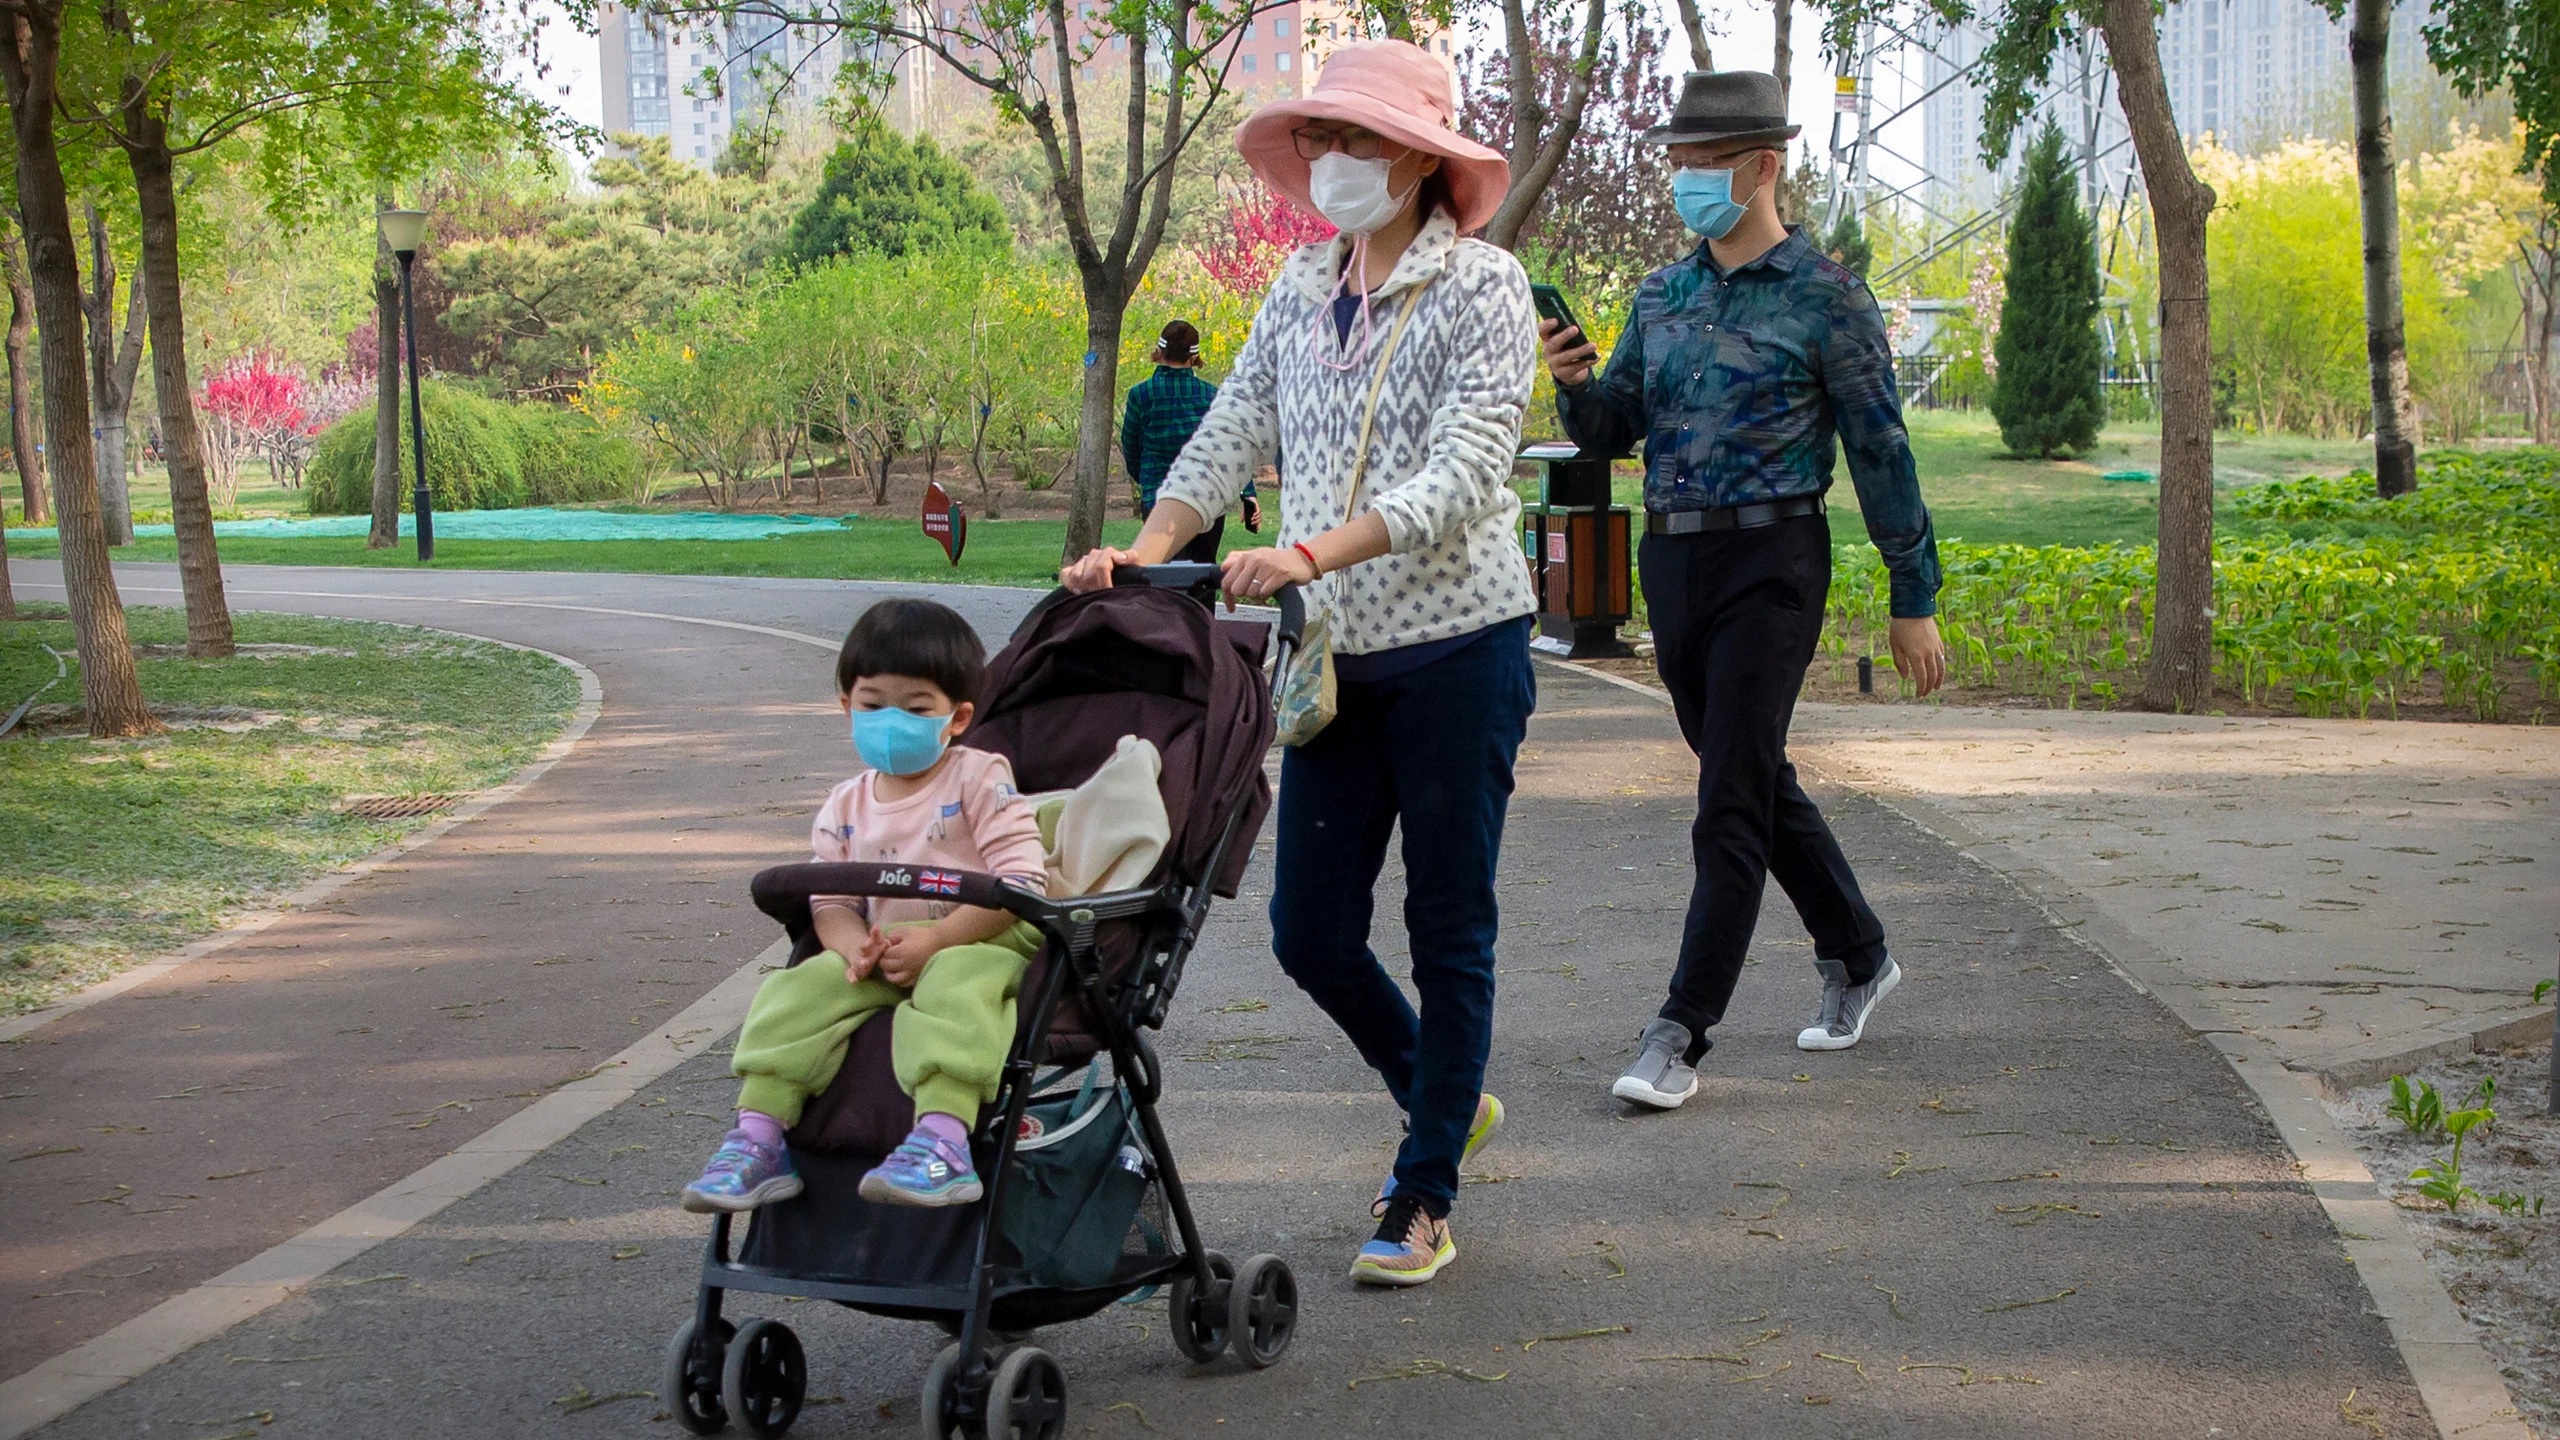 People face masks to protect against the spread of the new coronavirus as they walk through a public park in Beijing